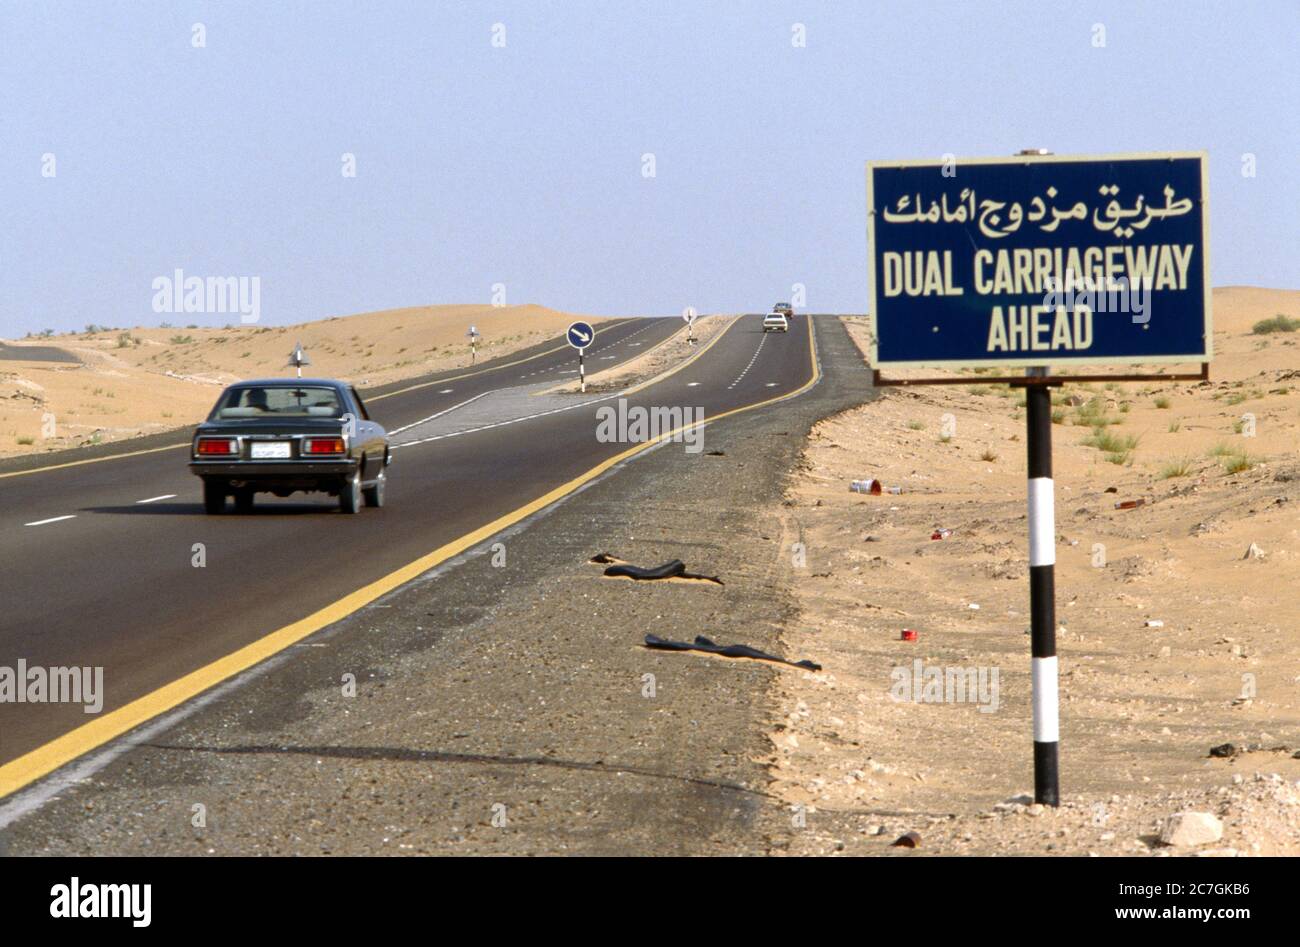 Dubai UAE Rubbish On The Side Of The Road In The Desert Dual Carriageway Ahead Stock Photo